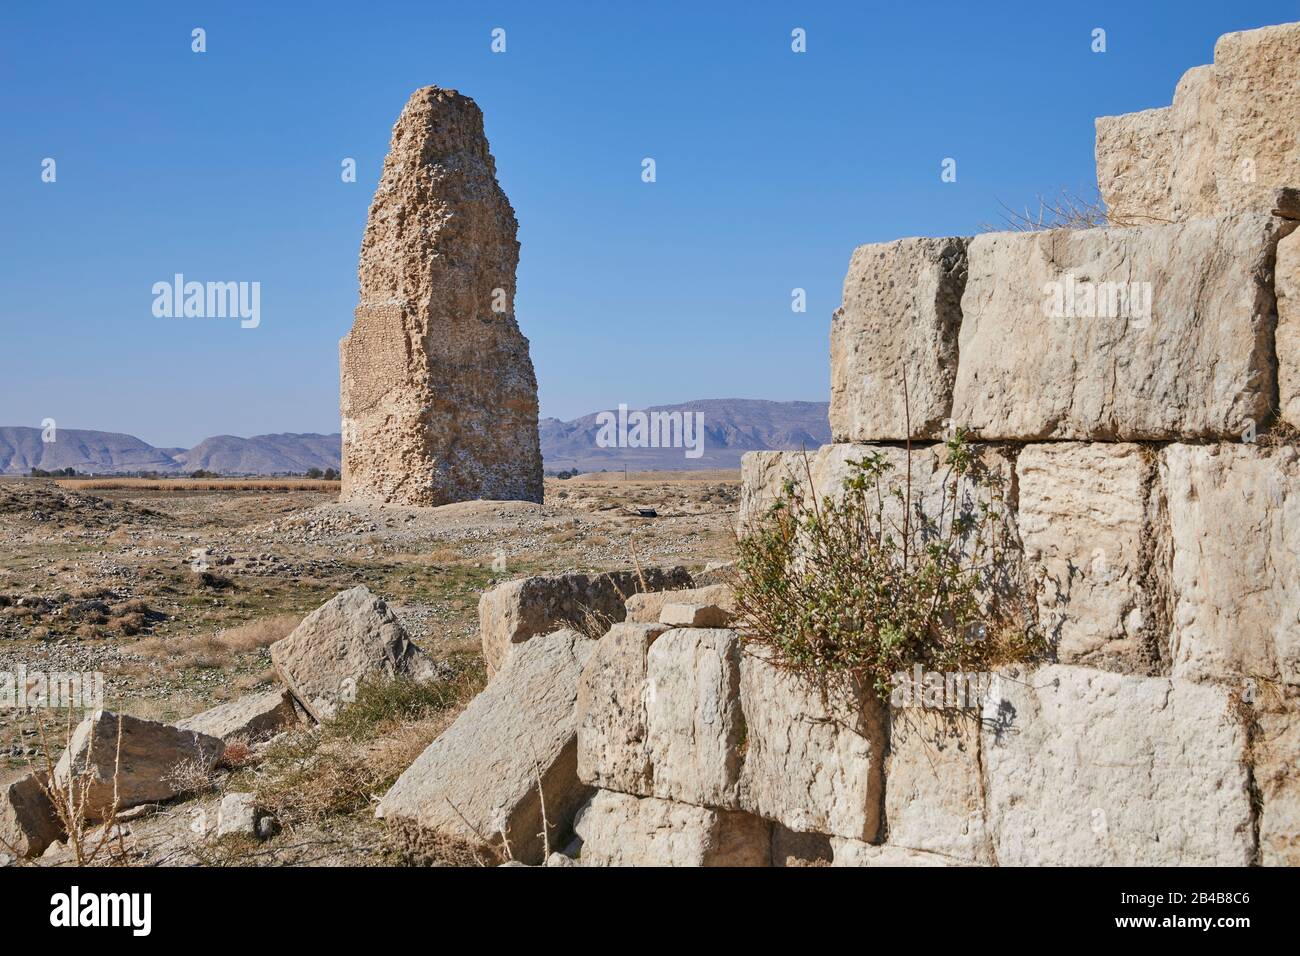 A ruined tower in the former round town of Gur near the Iranian city of Firuzabad, taken on 04.12.2017. The city was founded by Ardeshir I, the founder of the Sassanian Empire, and used as a residence. | usage worldwide Stock Photo